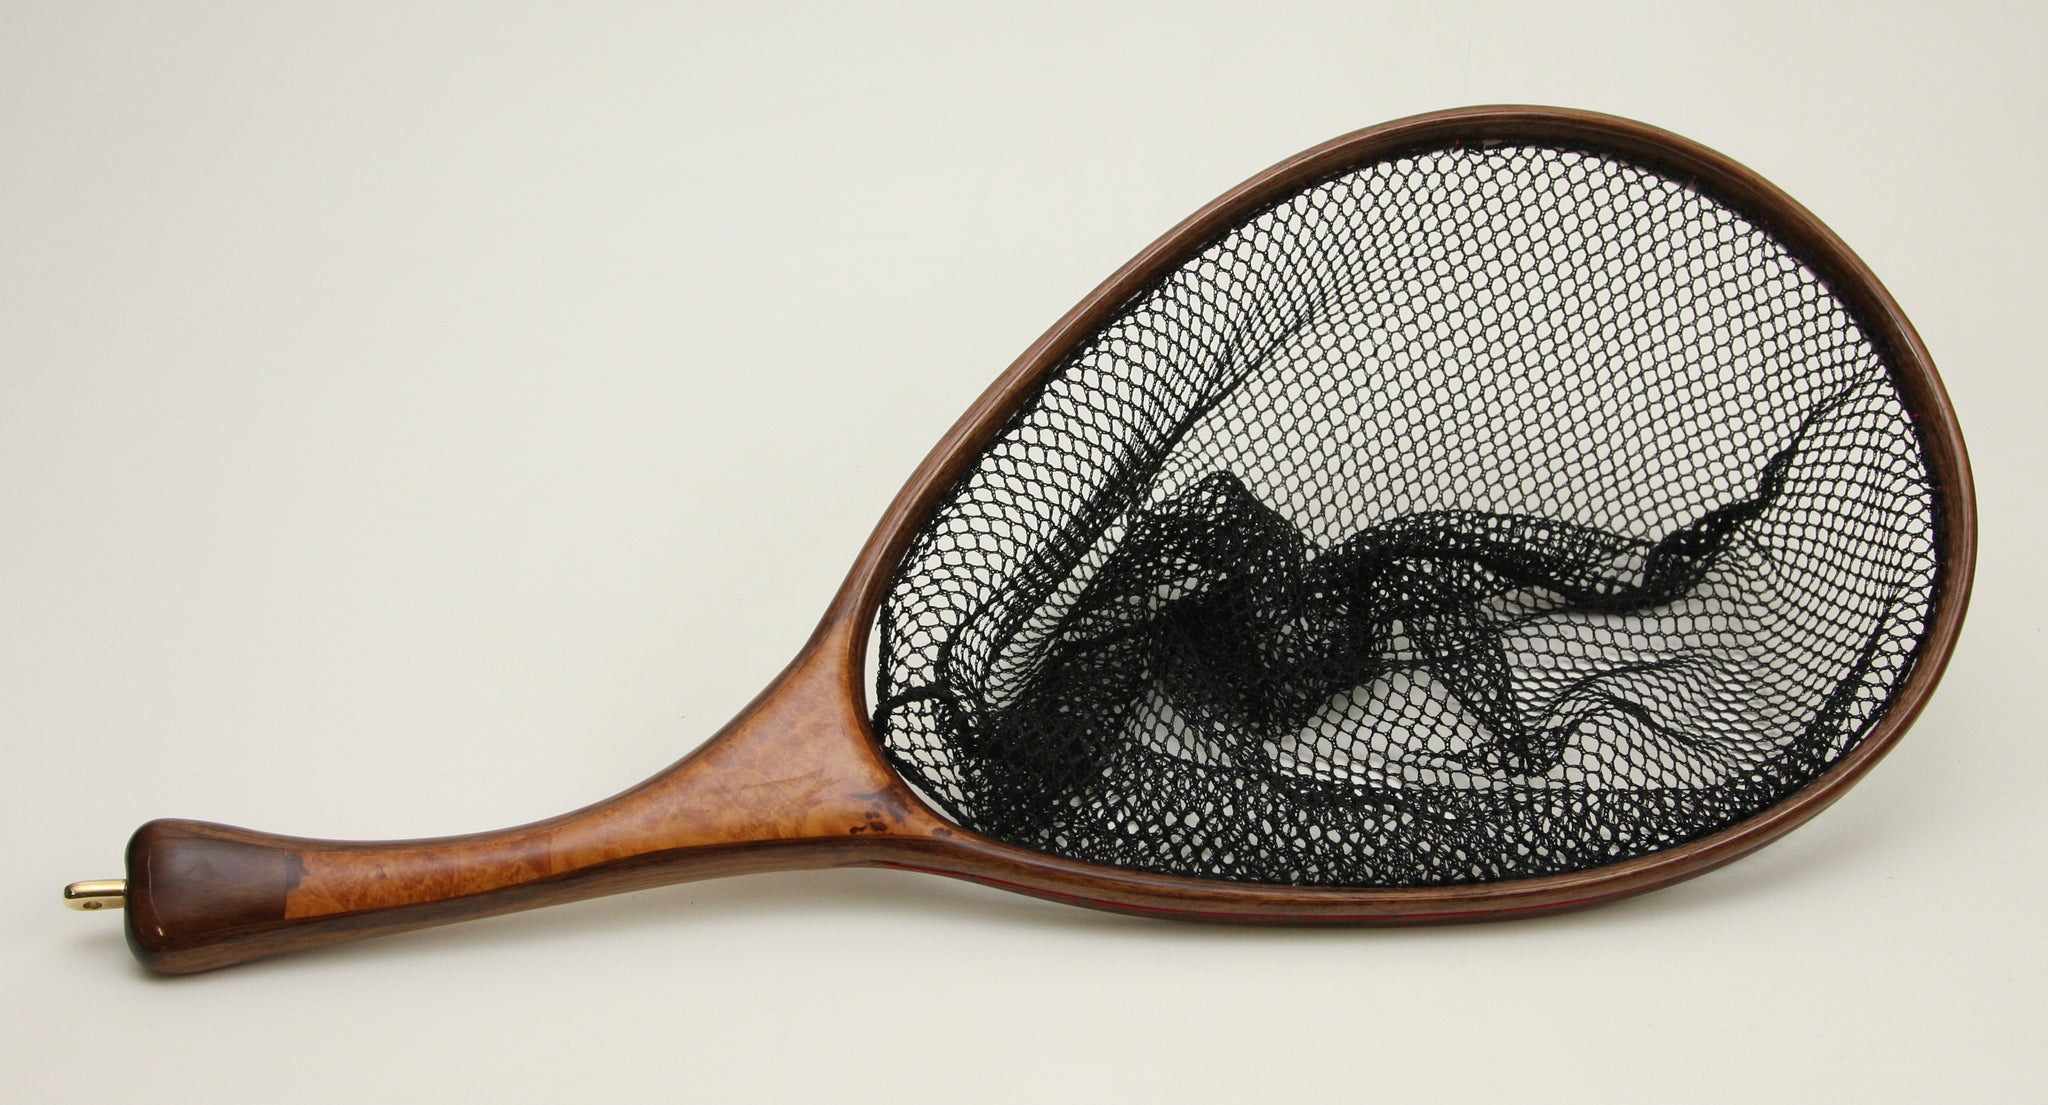 Handcrafted Wood Landing Nets For Flyfishing Out Of A Wood, 54% OFF